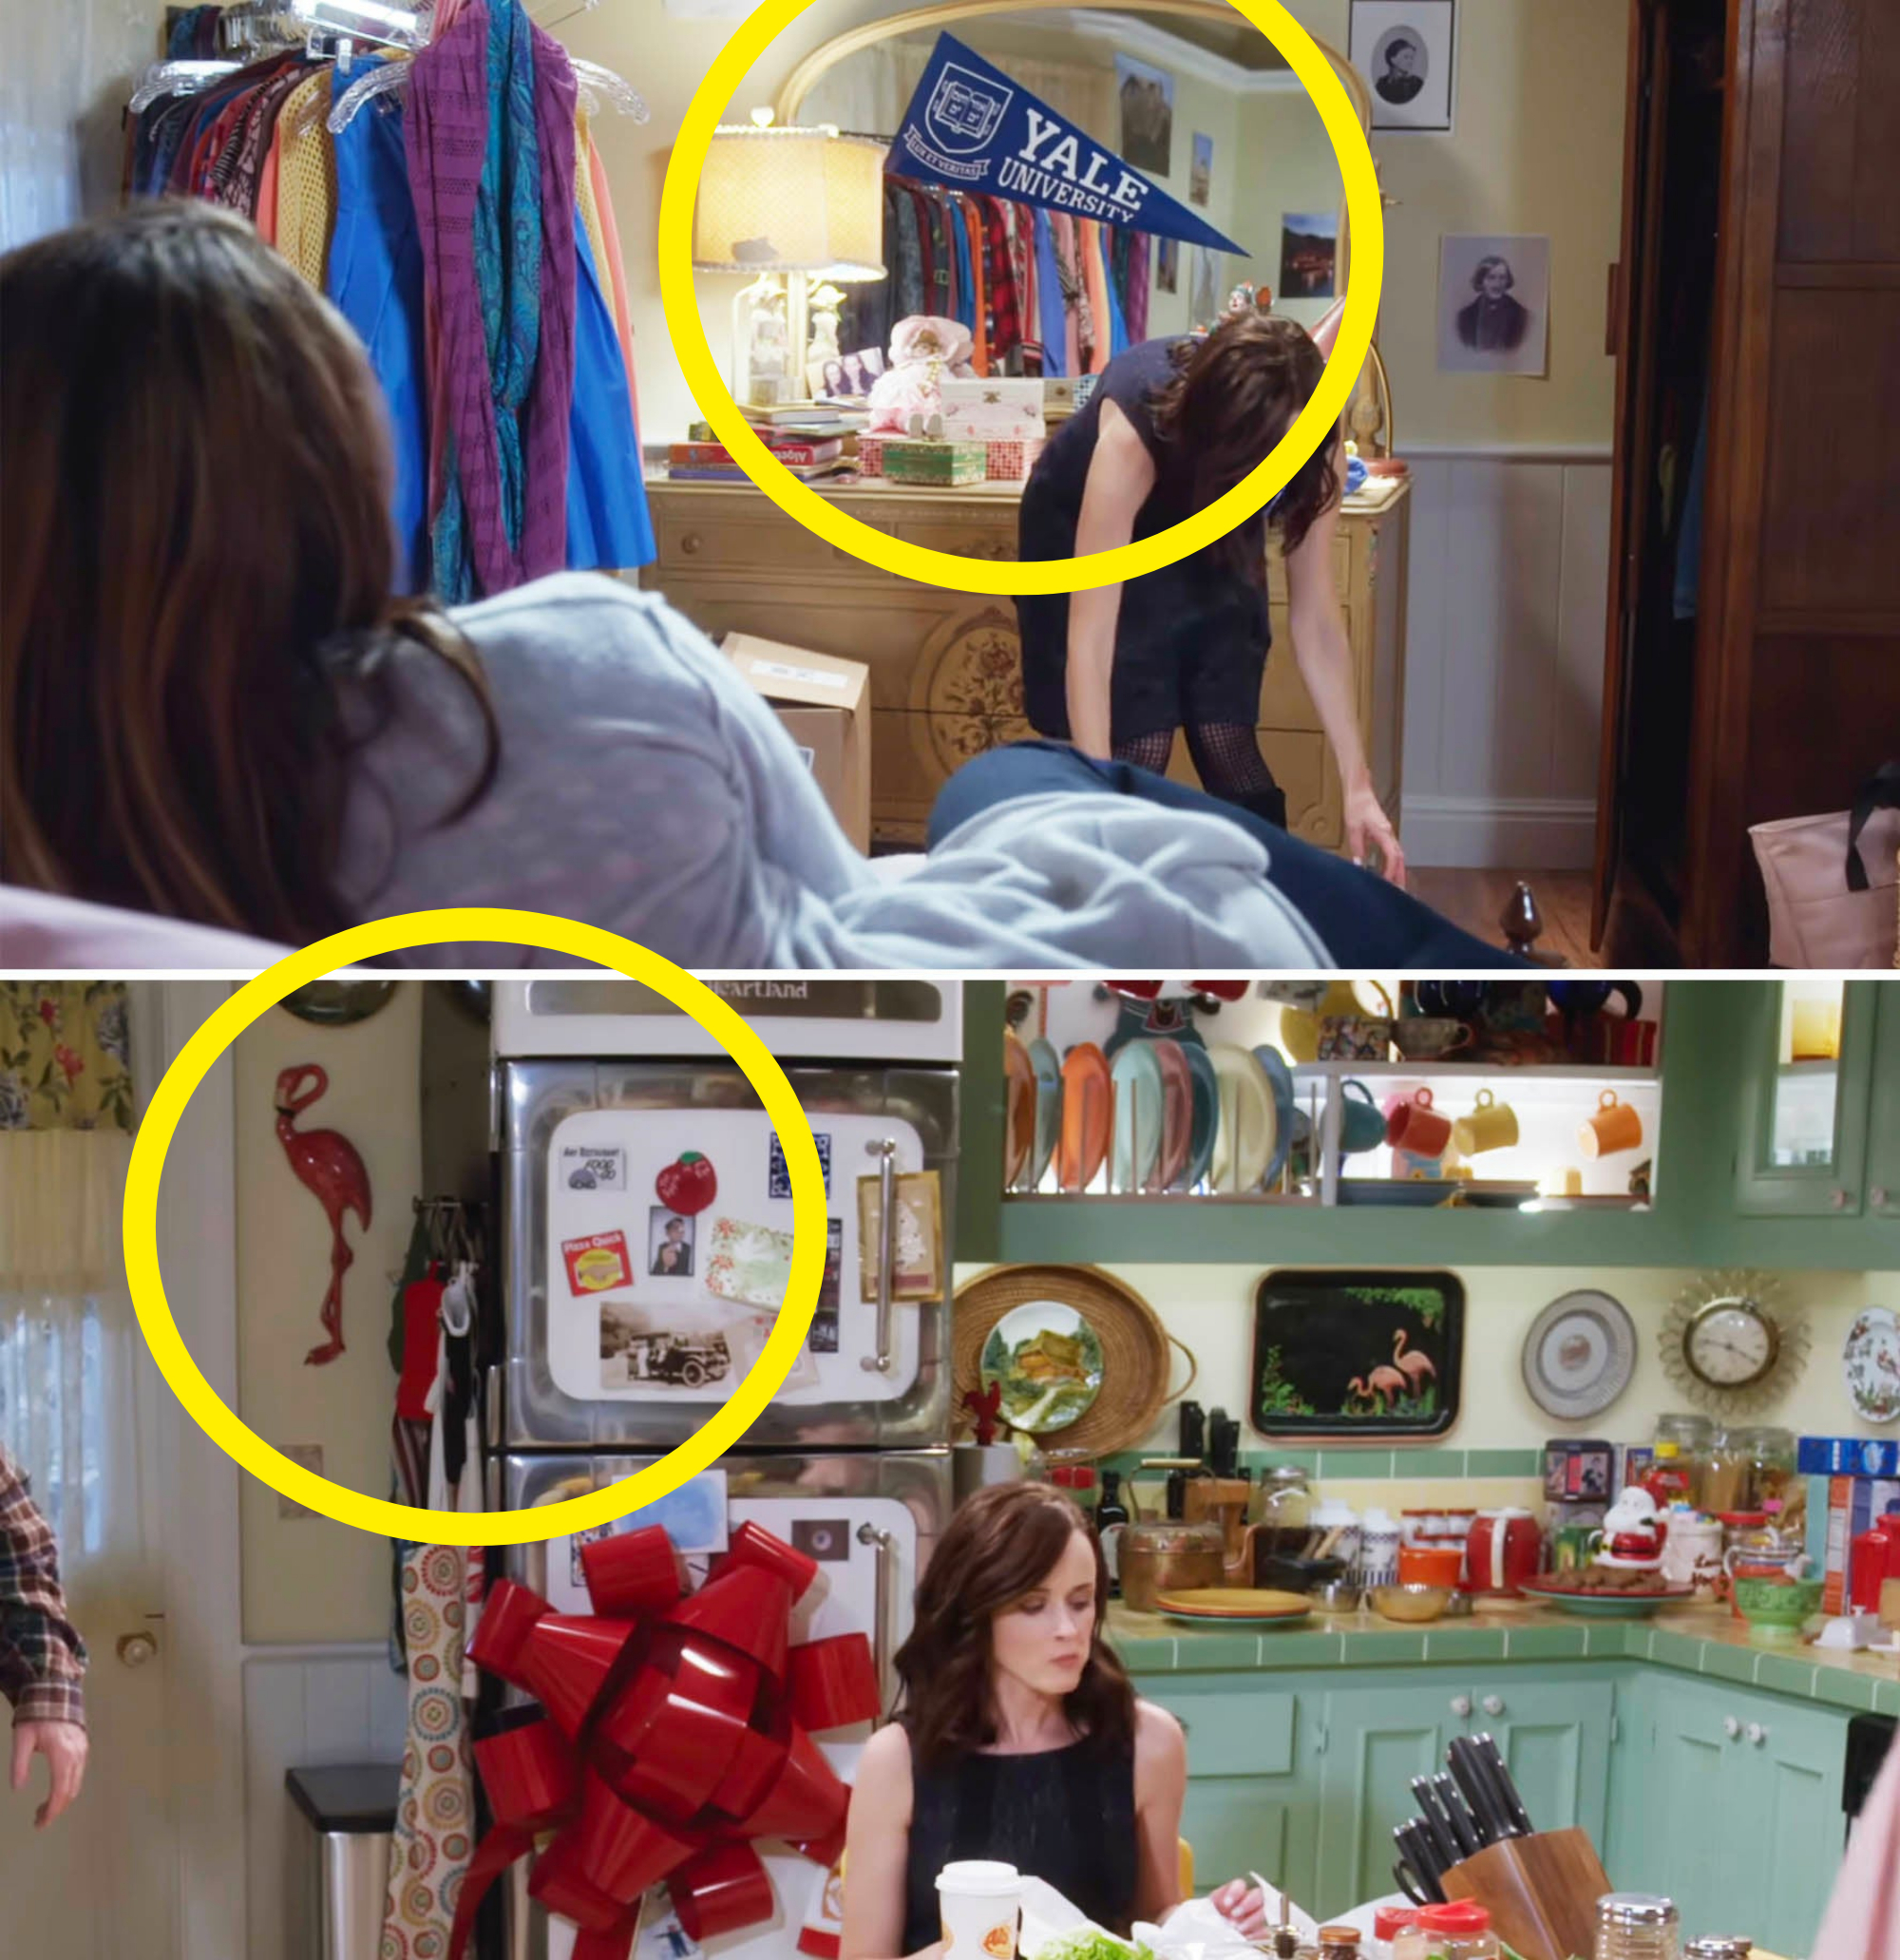 the magnet and the yale flag in the episode